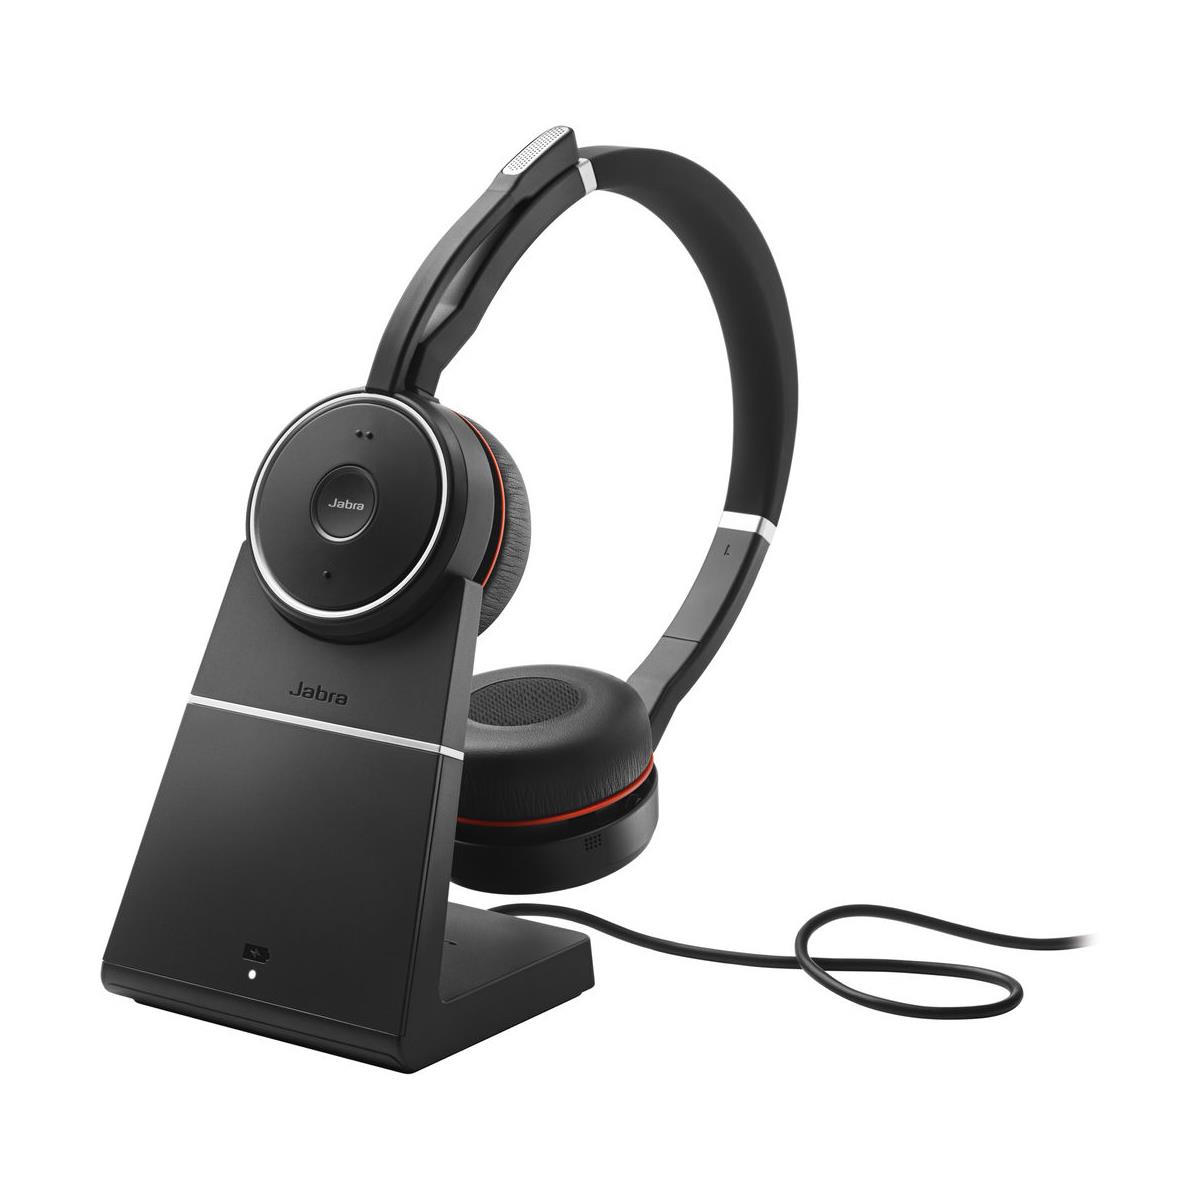 Image of Jabra Evolve 75 MS Stereo Bluetooth Headset with USB Adapter and Charging Stand